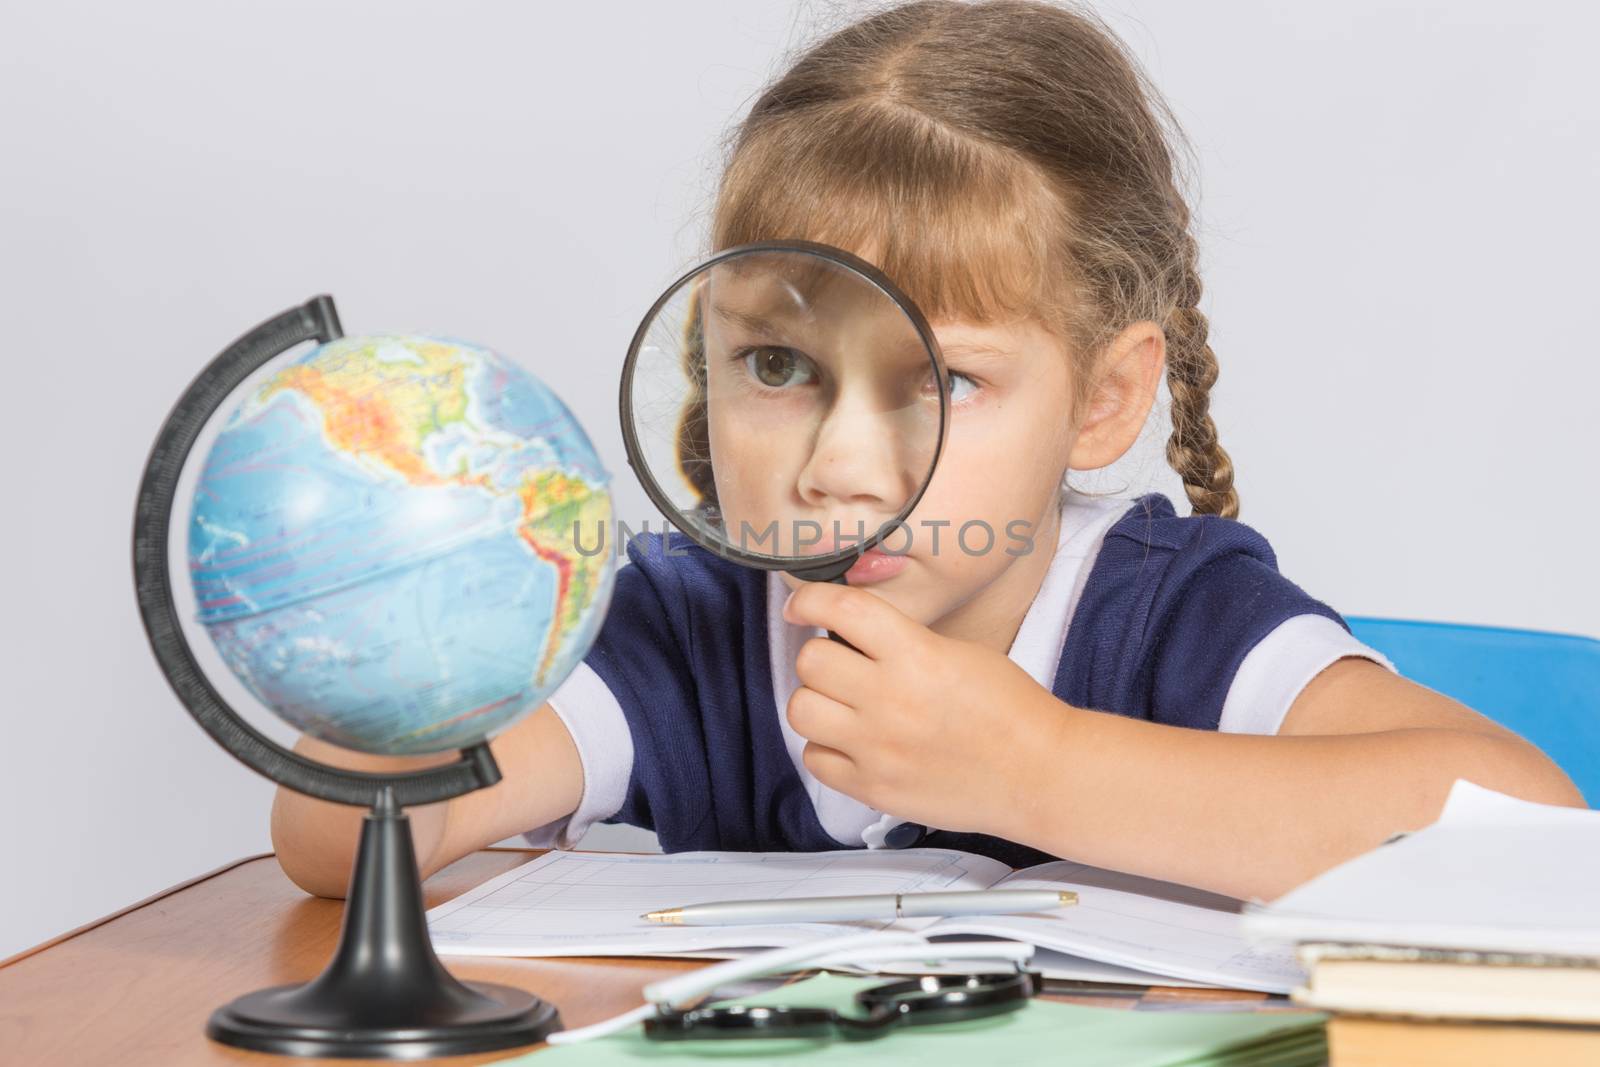 Schoolgirl looking at globe through a magnifying glass by Madhourse